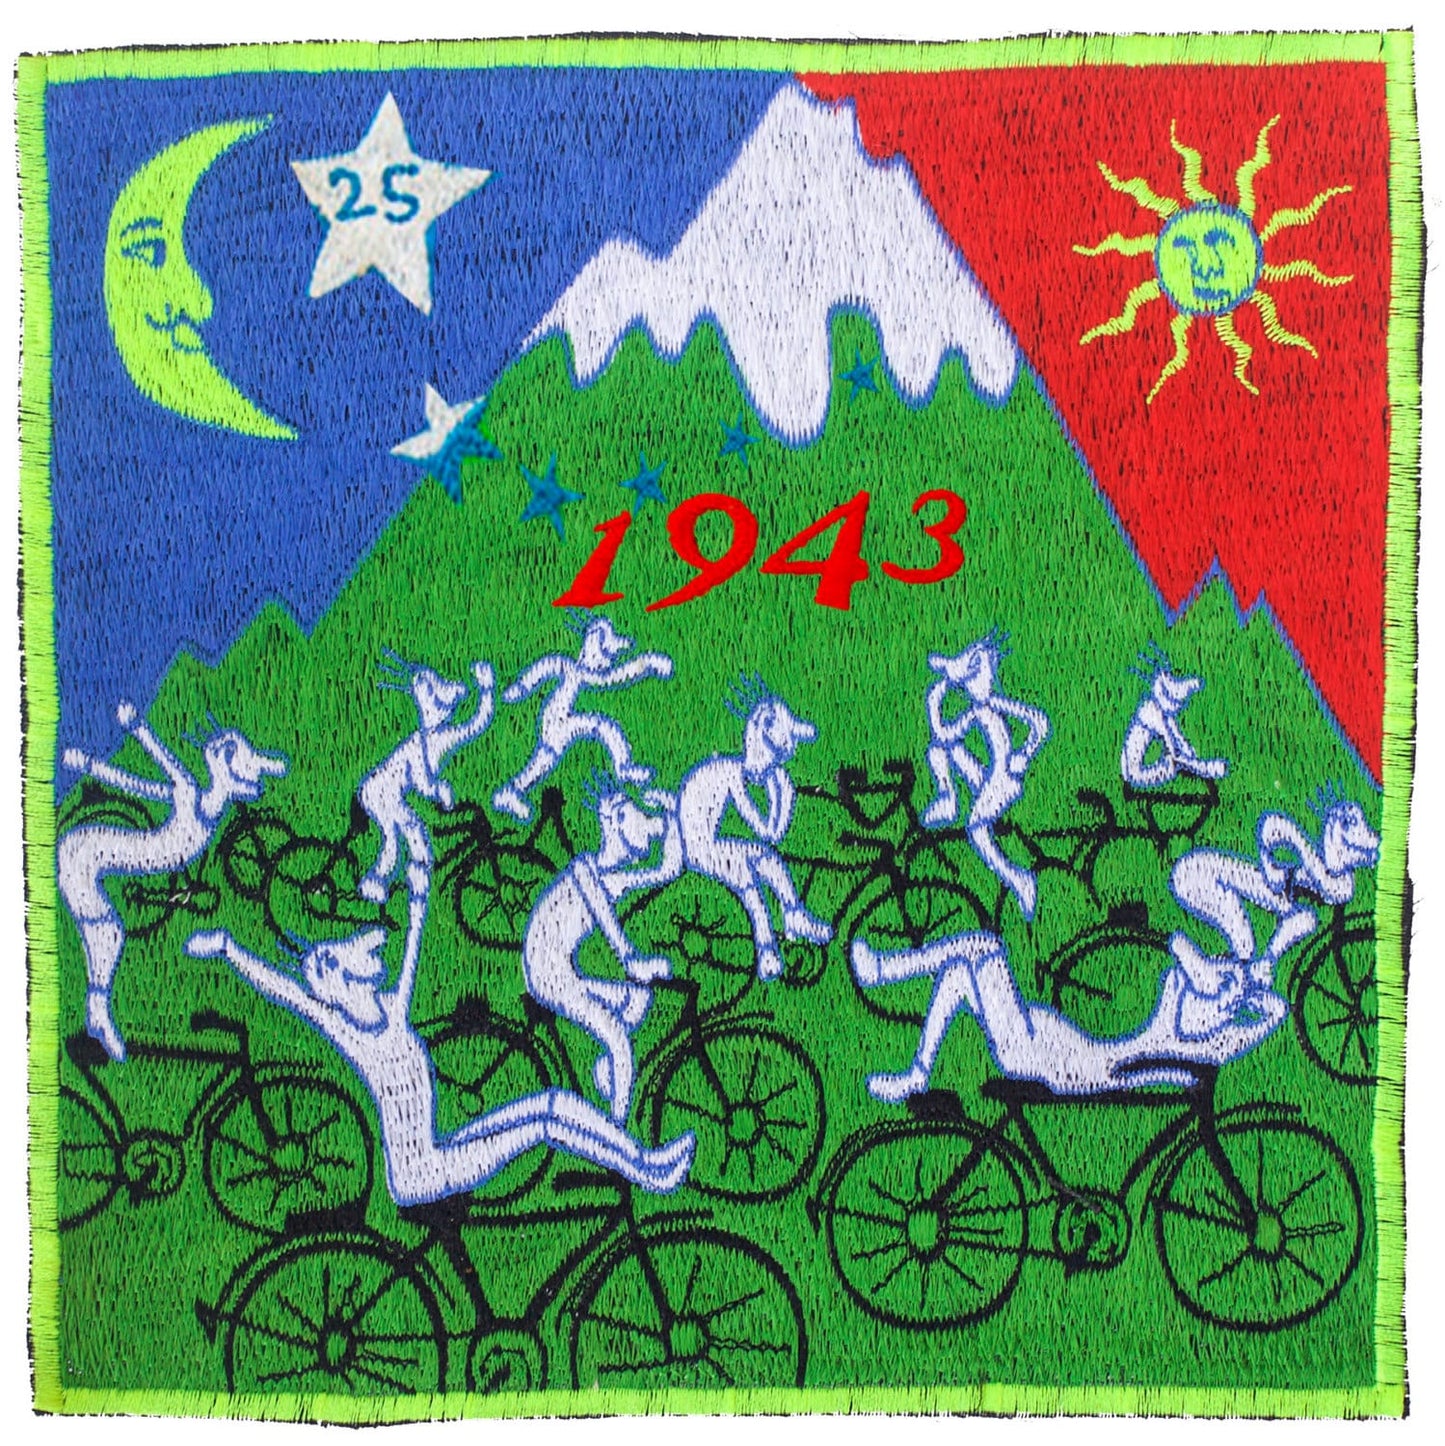 Hofmann Bicycle Day Party Patch Psychedelic Hippie Leary Albert Hofmann discovery of LSD vintage artwork